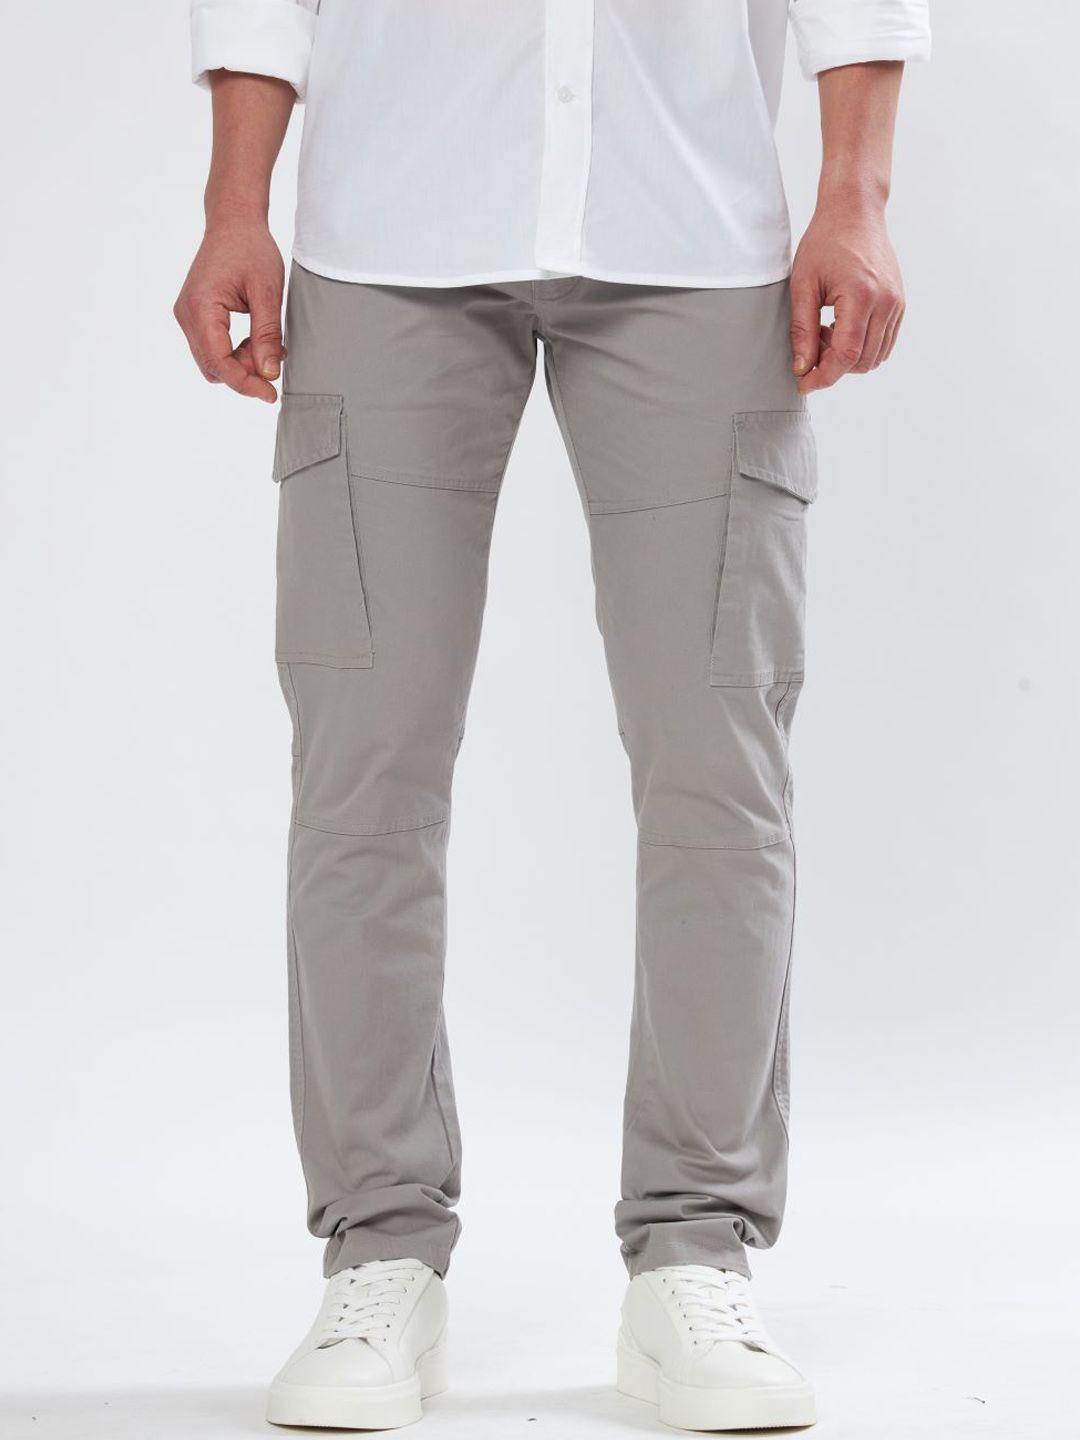 united-denim-men-relaxed-fit-cargo-trousers